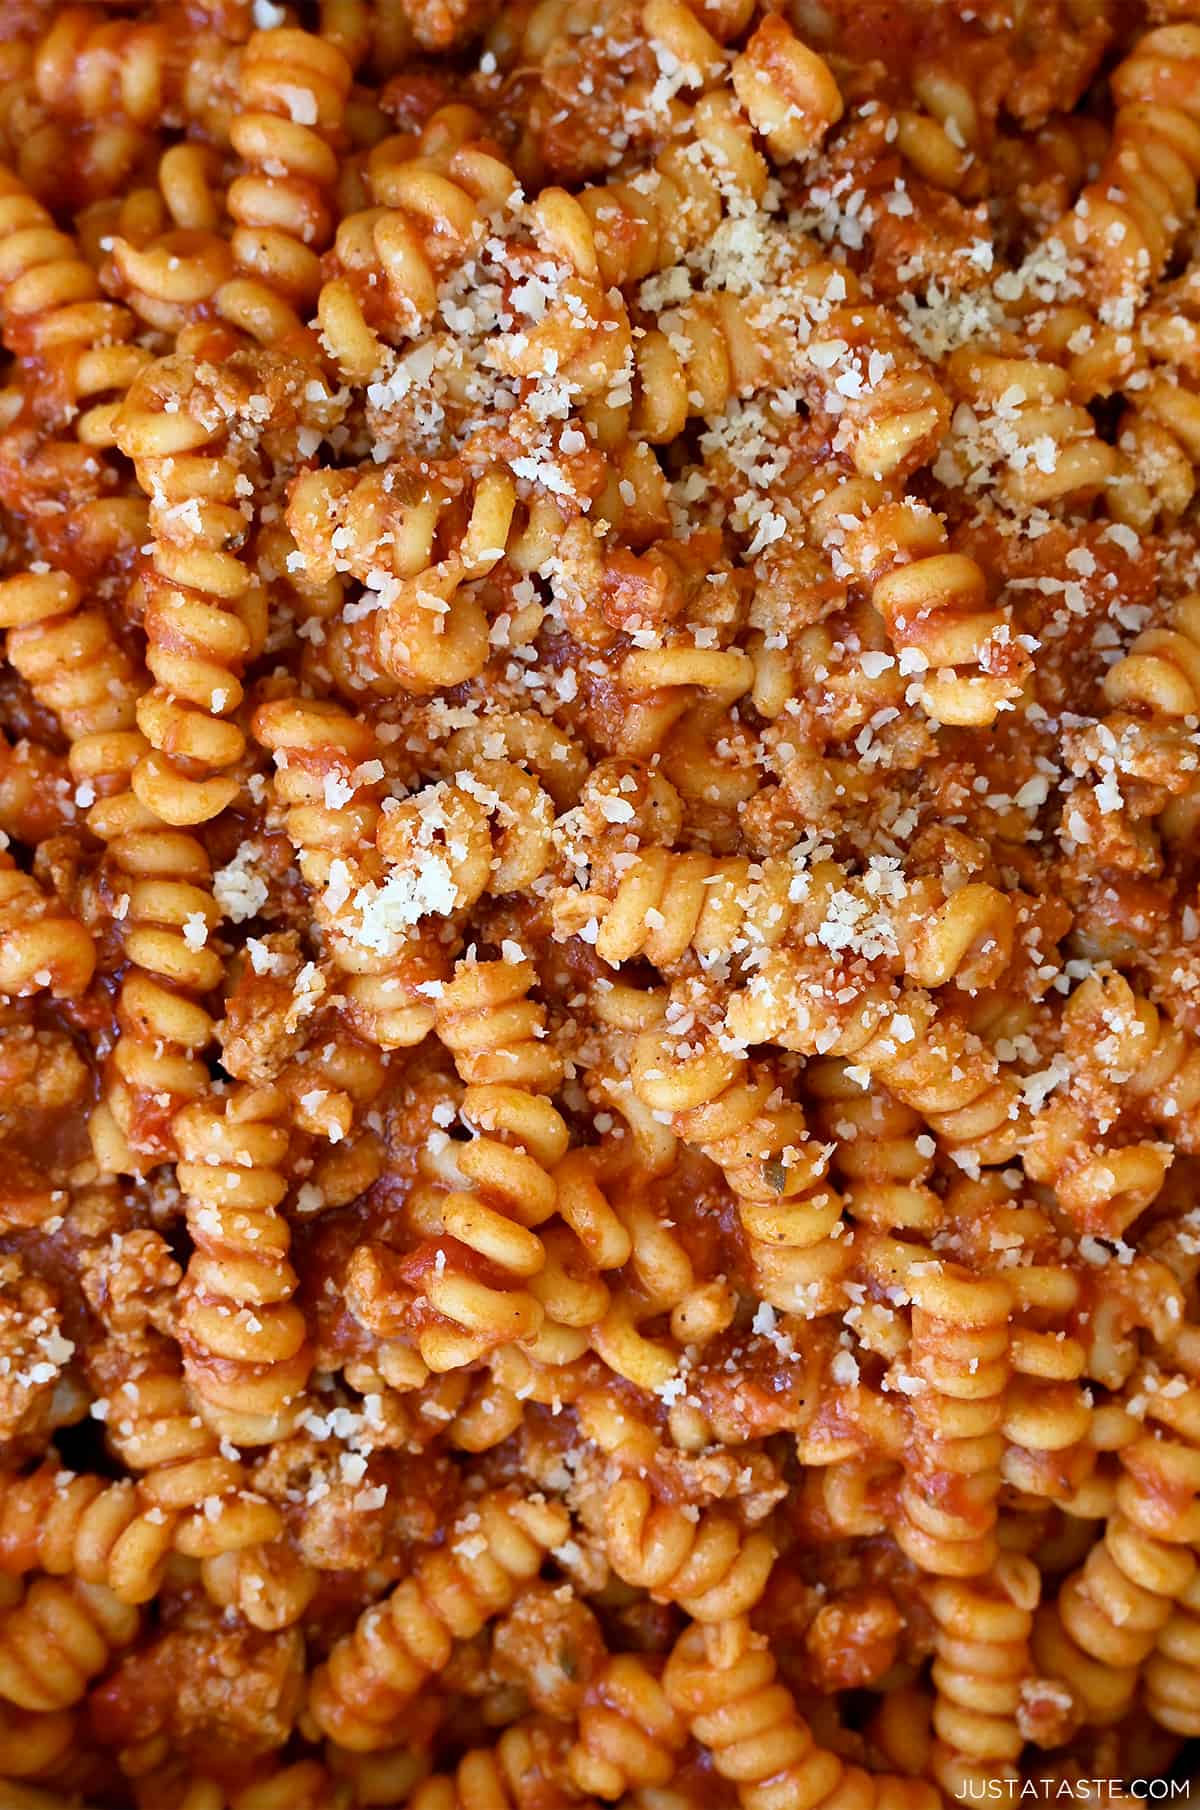 Spiral pasta covered in a hearty meat sauce and garnished with grated Parmesan cheese.